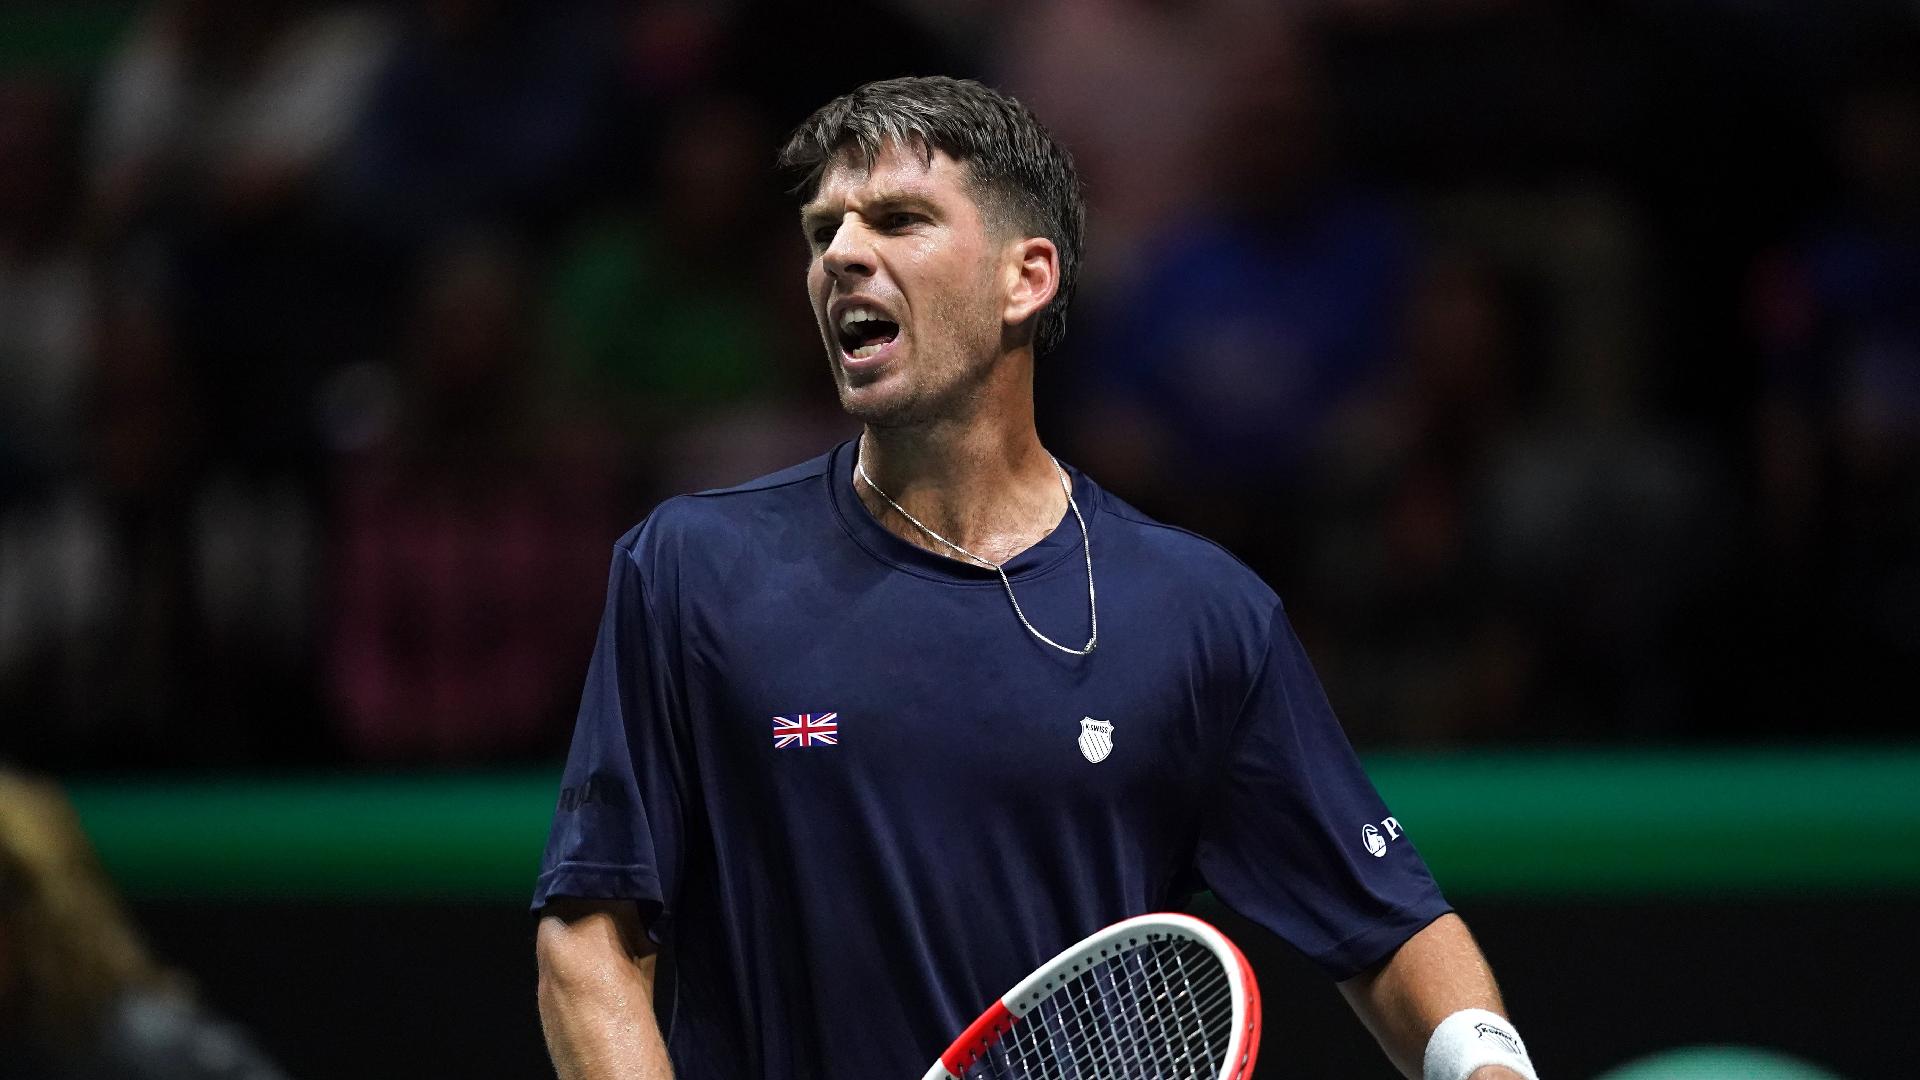 Great Britain and France face decisive doubles rubber for Davis Cup place